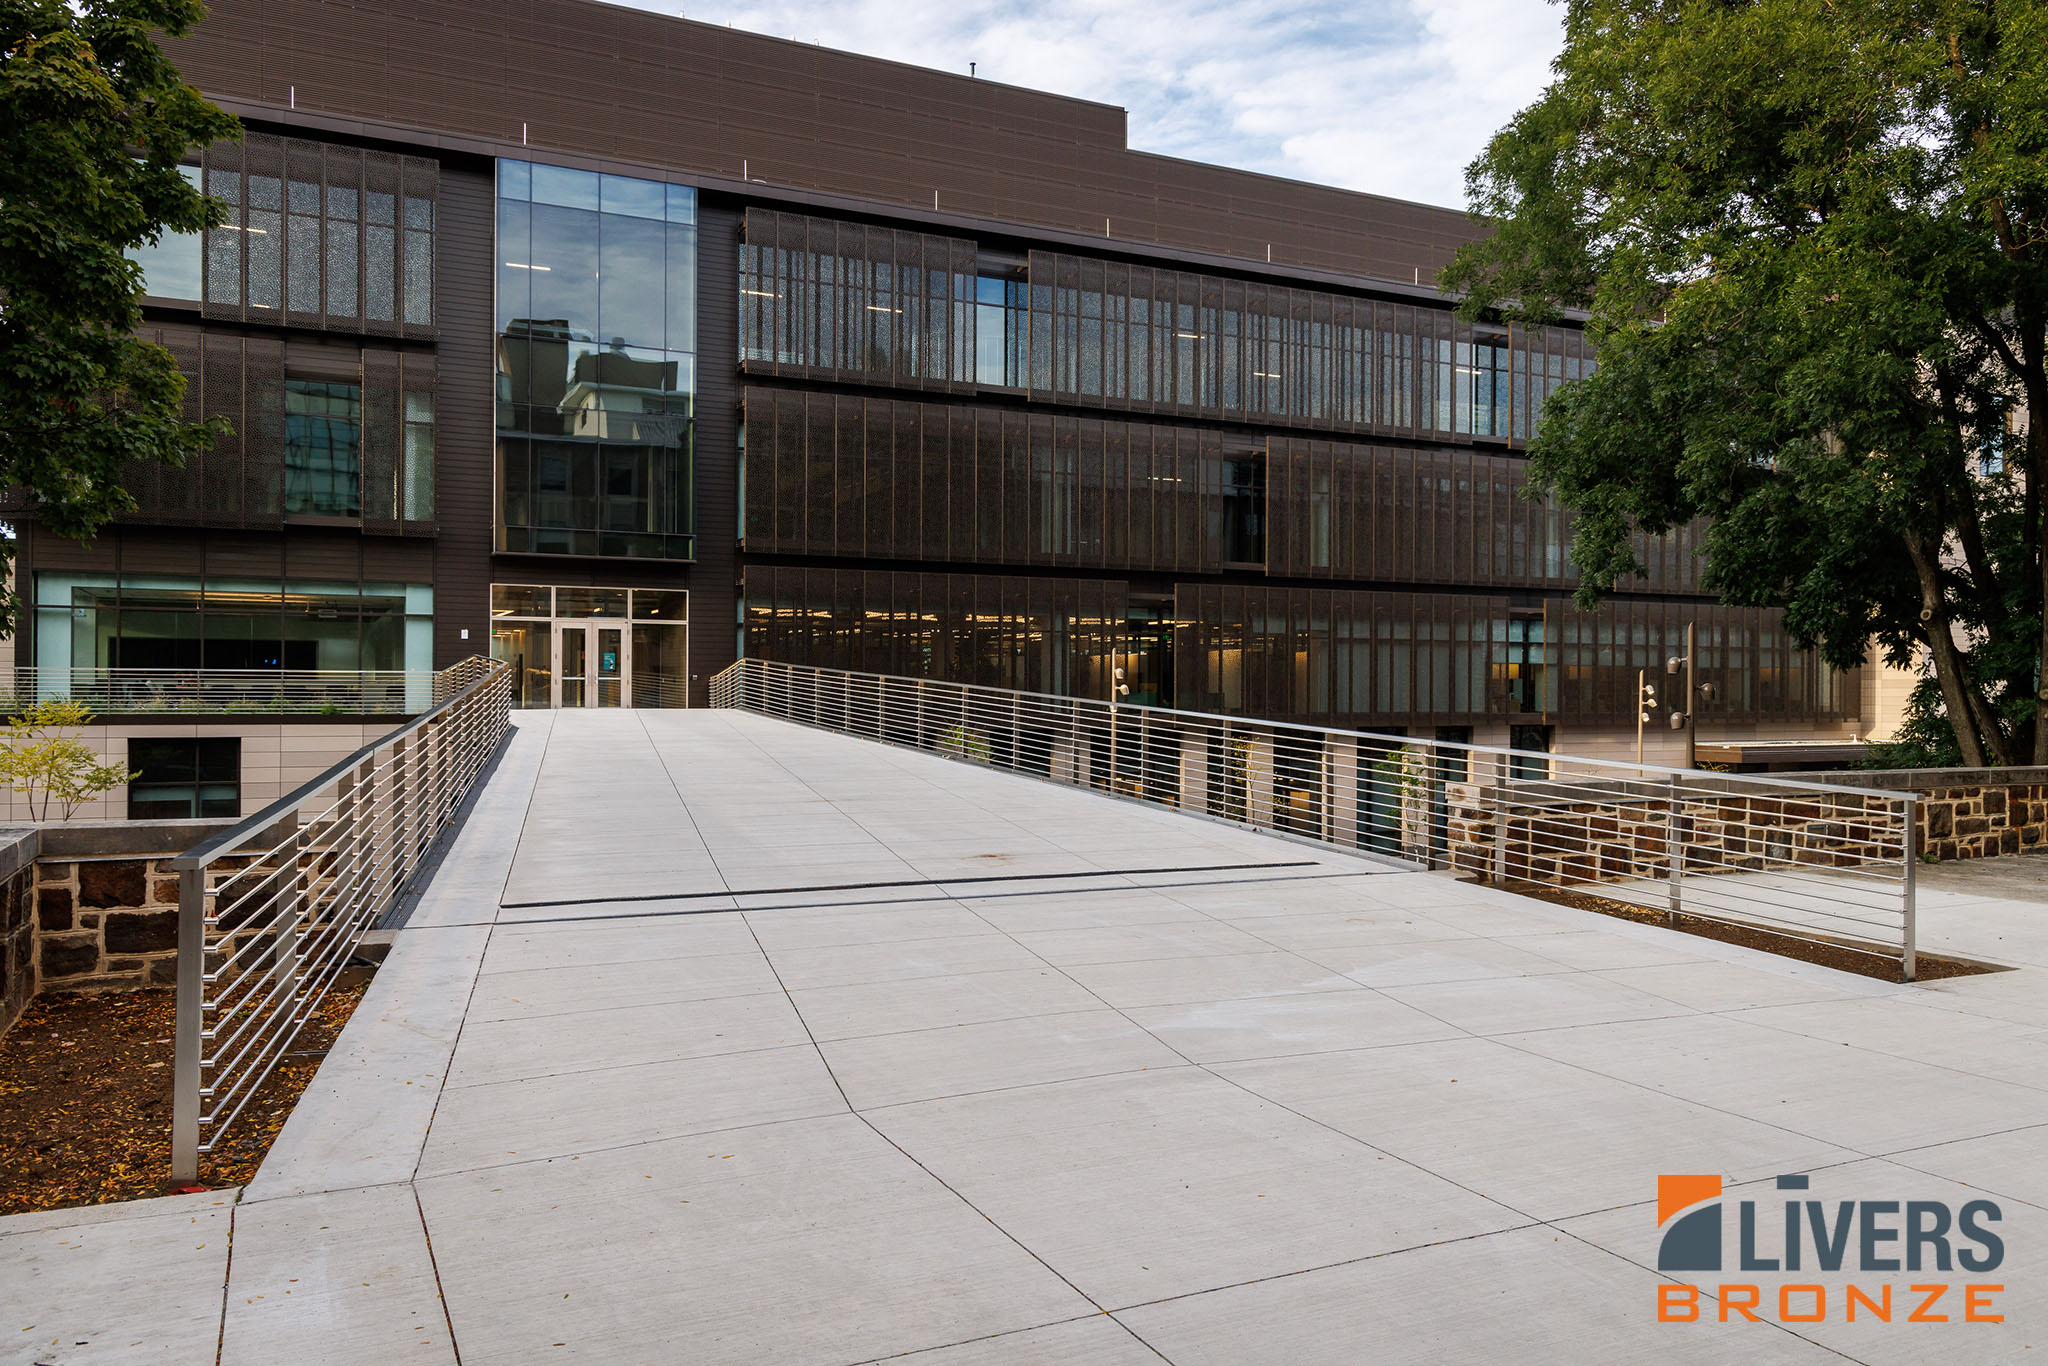 Livers Bronze LED Railings installed at the exterior pedestrian ramp at Lehigh University are Made in the USA